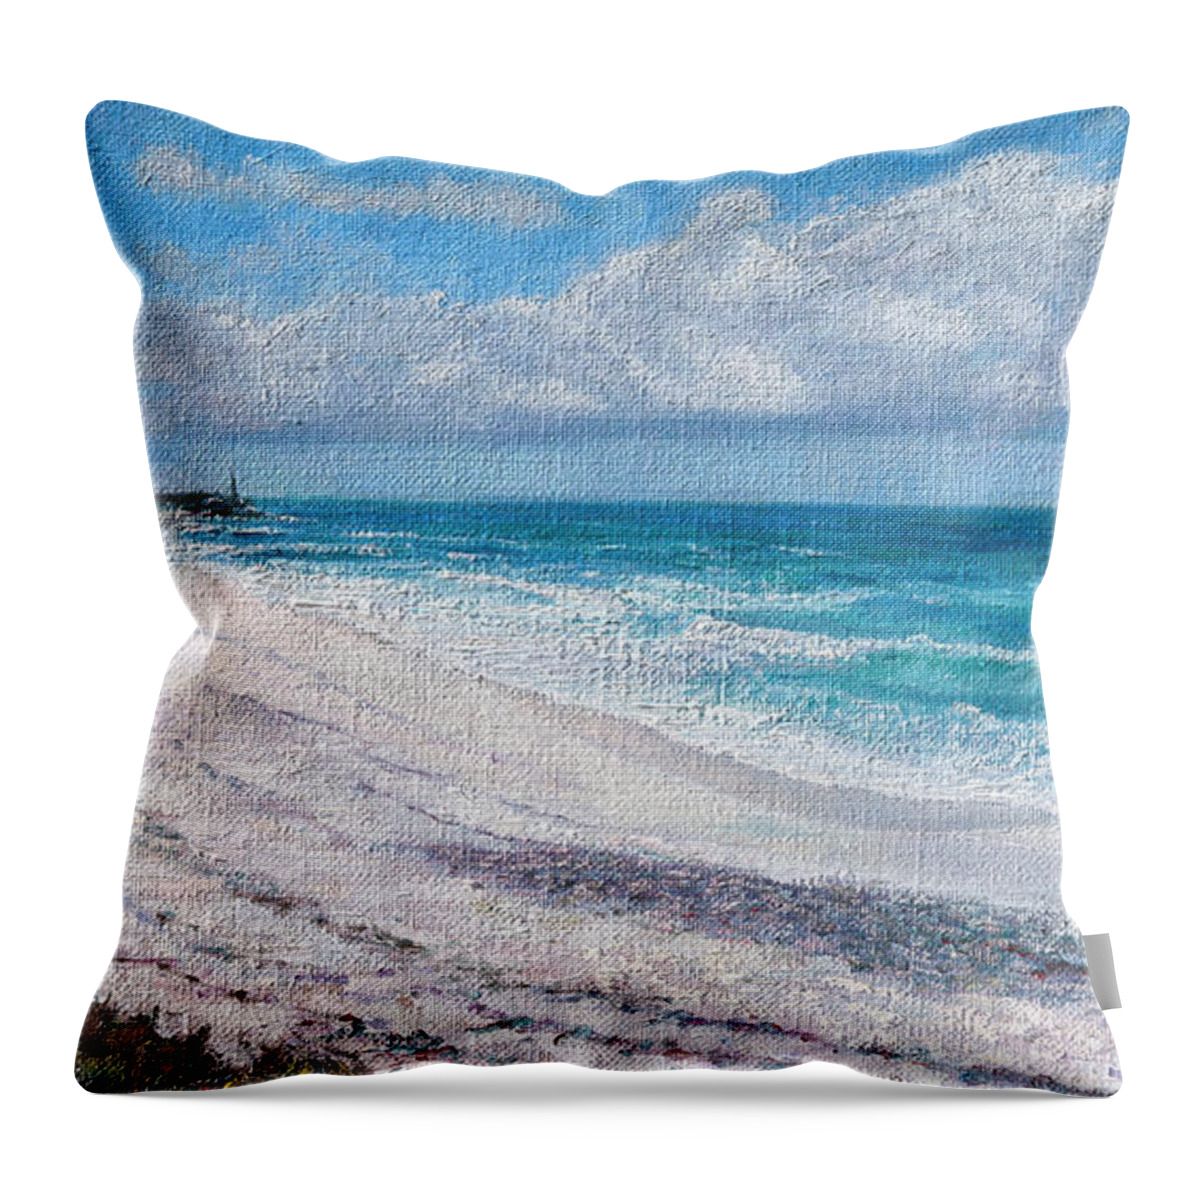 Hope Town Throw Pillow featuring the painting Hope Town Beach by Ritchie Eyma